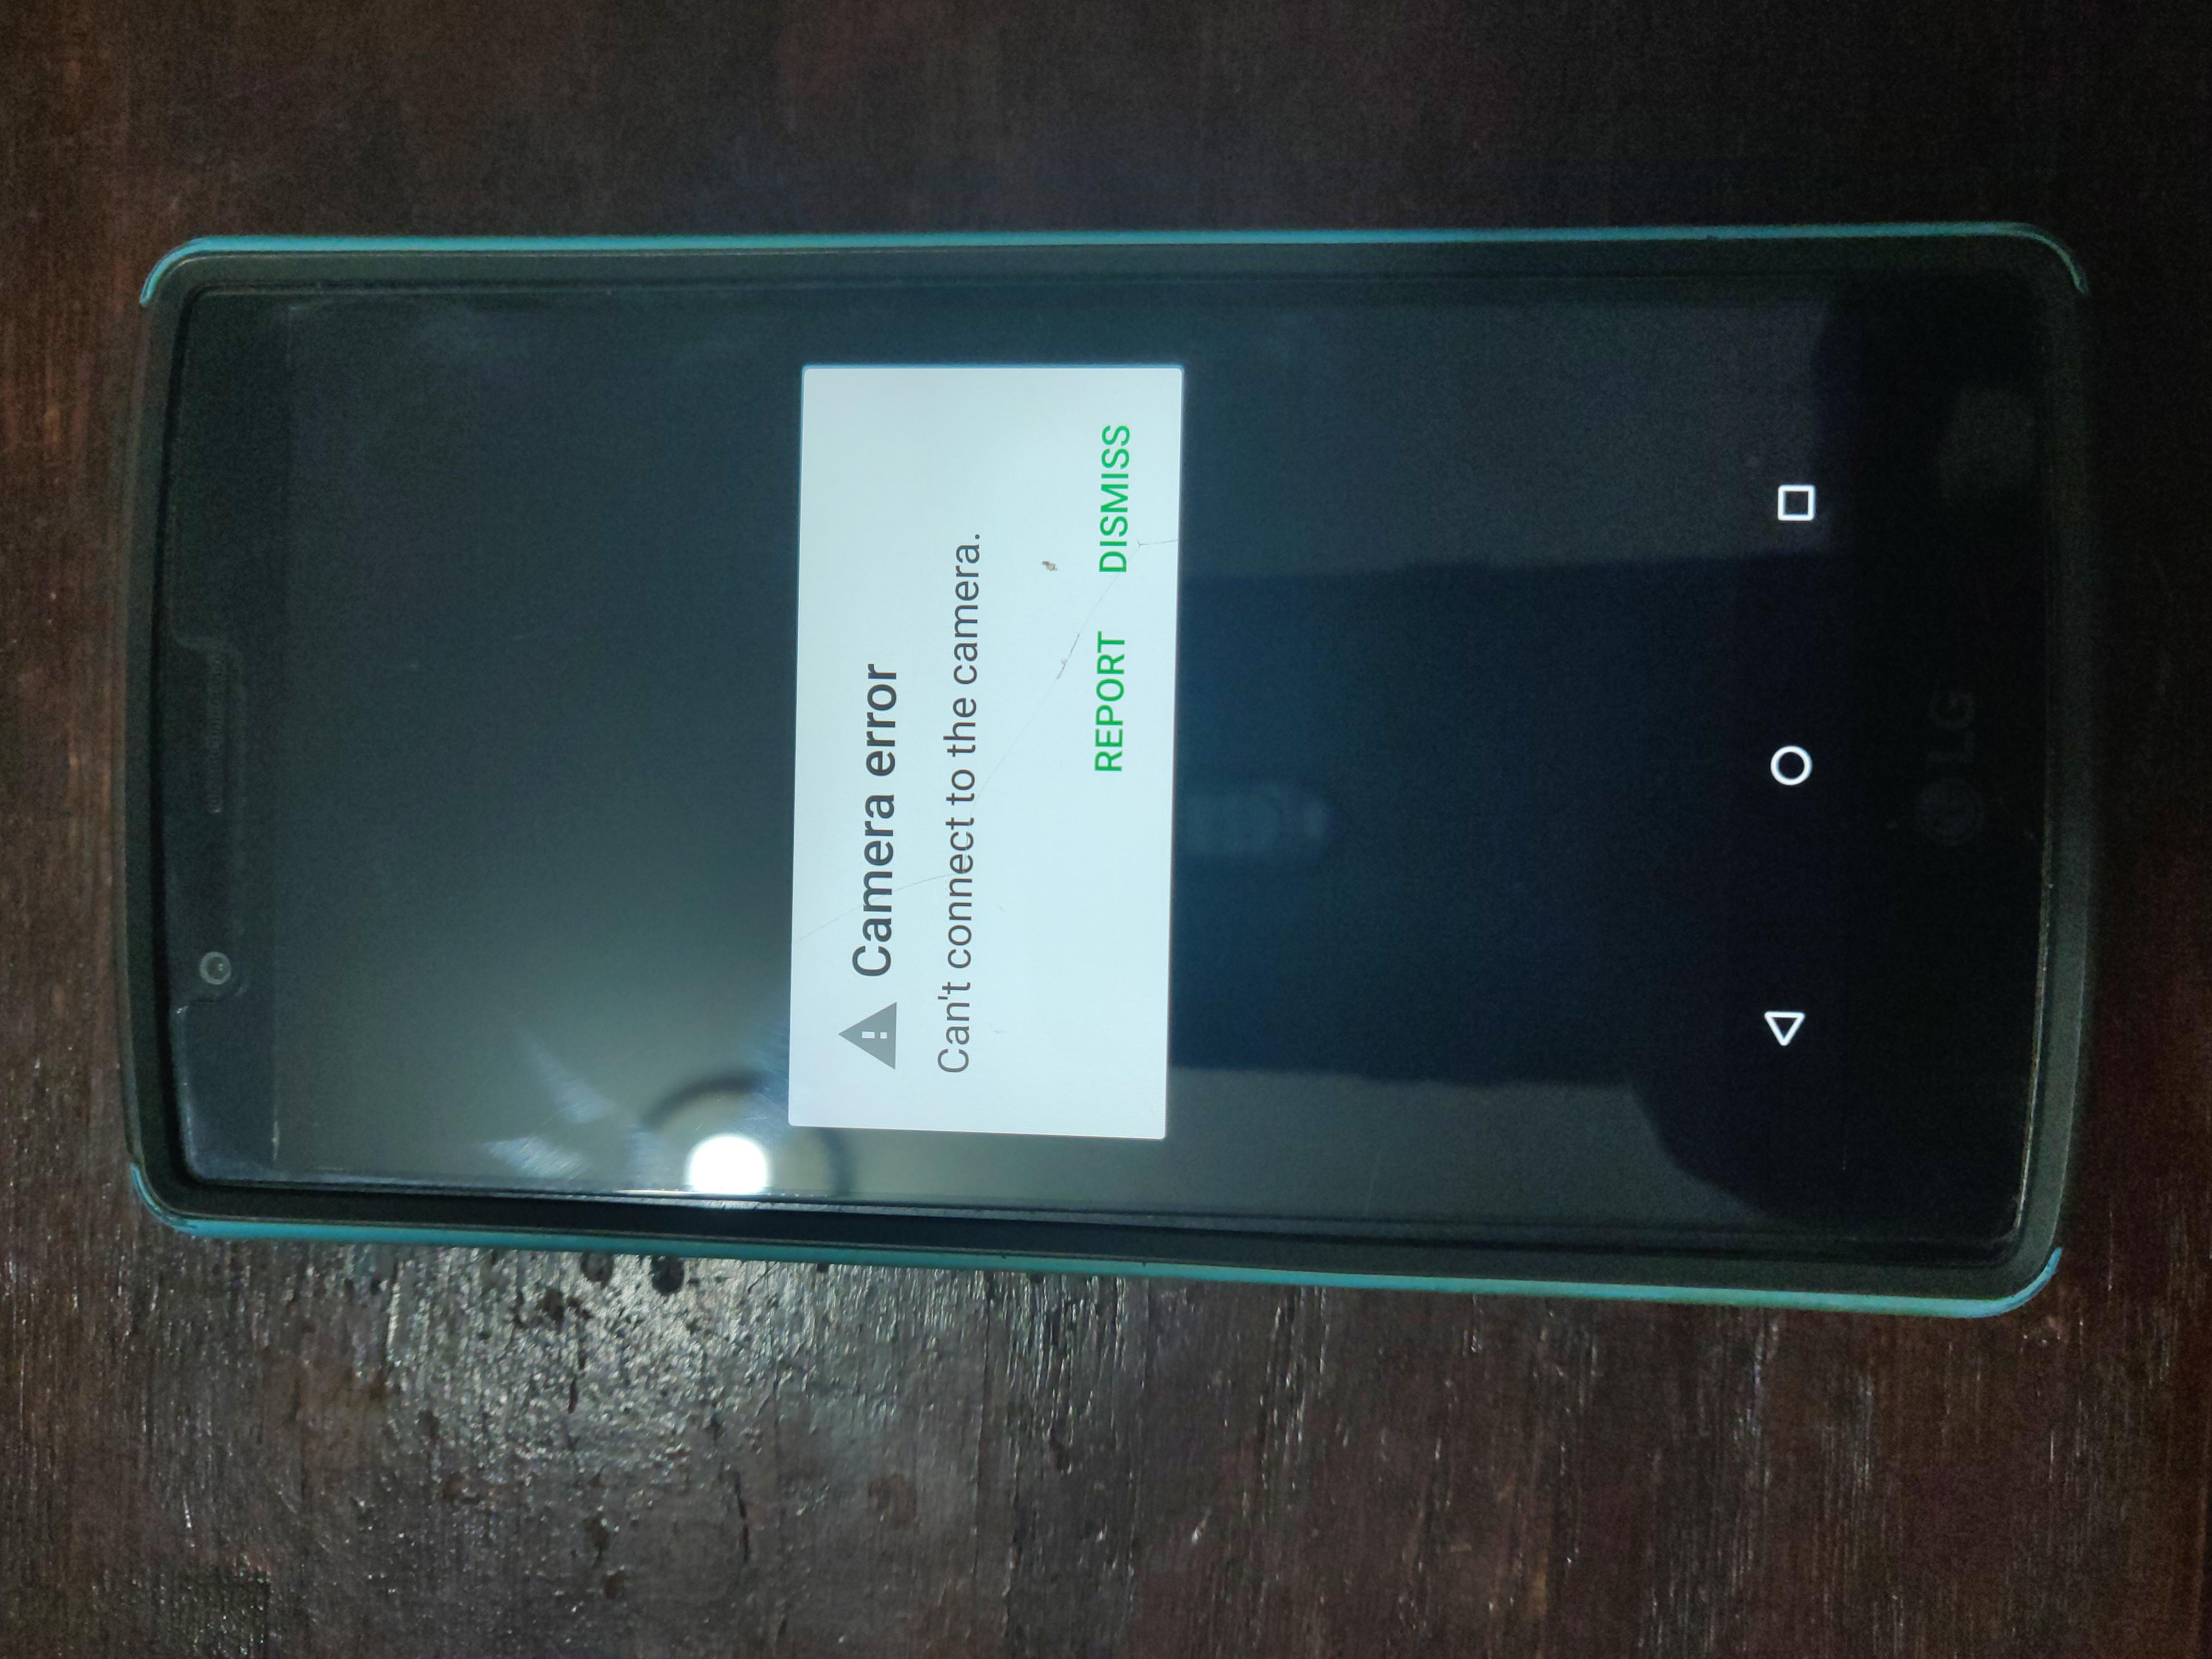 lineage os camera not working